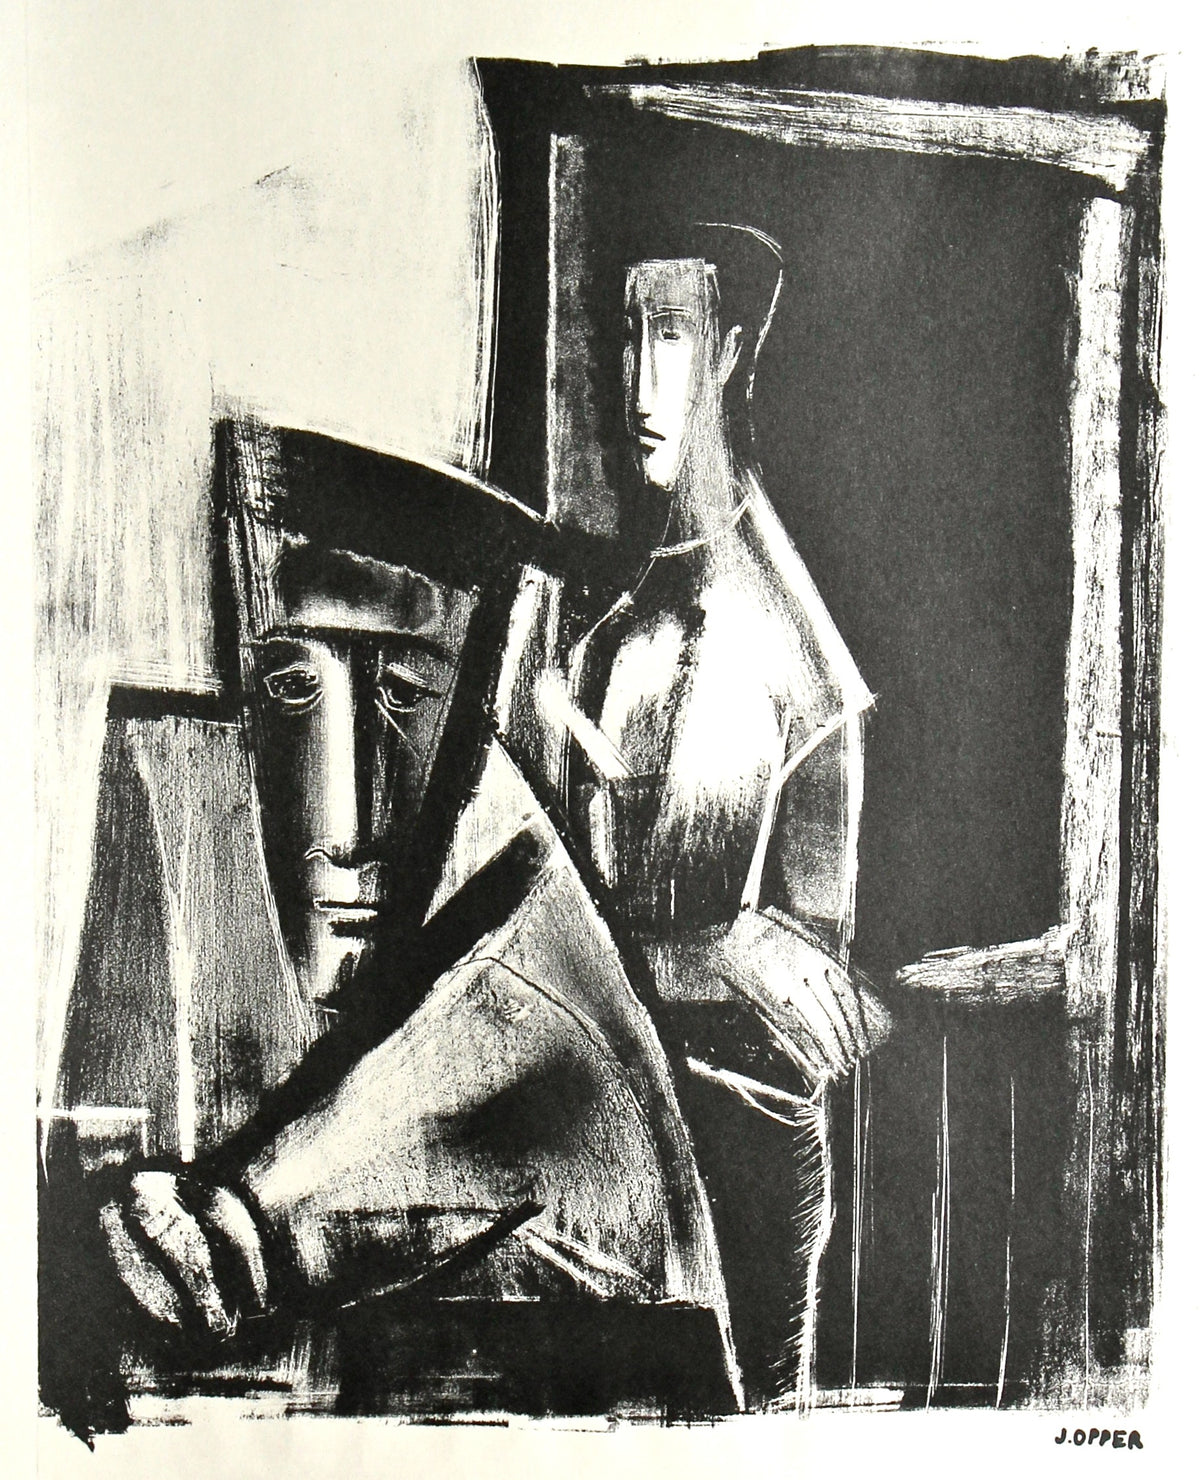 Interior Scene with Couple&lt;br&gt;1940-50s Stone Lithograph&lt;br&gt;&lt;br&gt;#40219